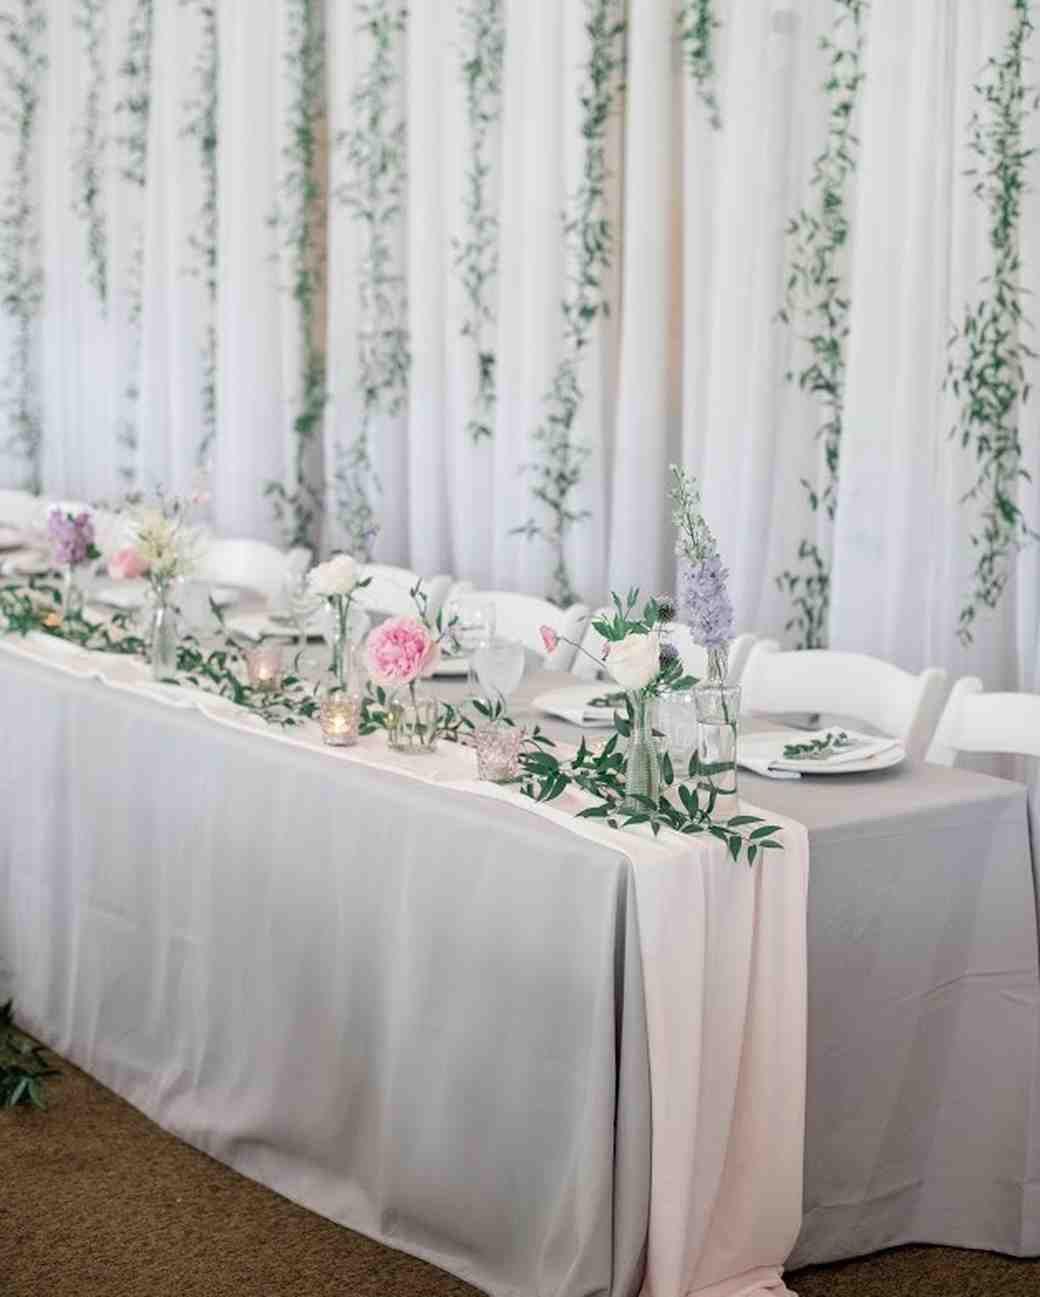 Head Table Wedding Decorations
 28 Ideas for Sitting Pretty at Your Head Table